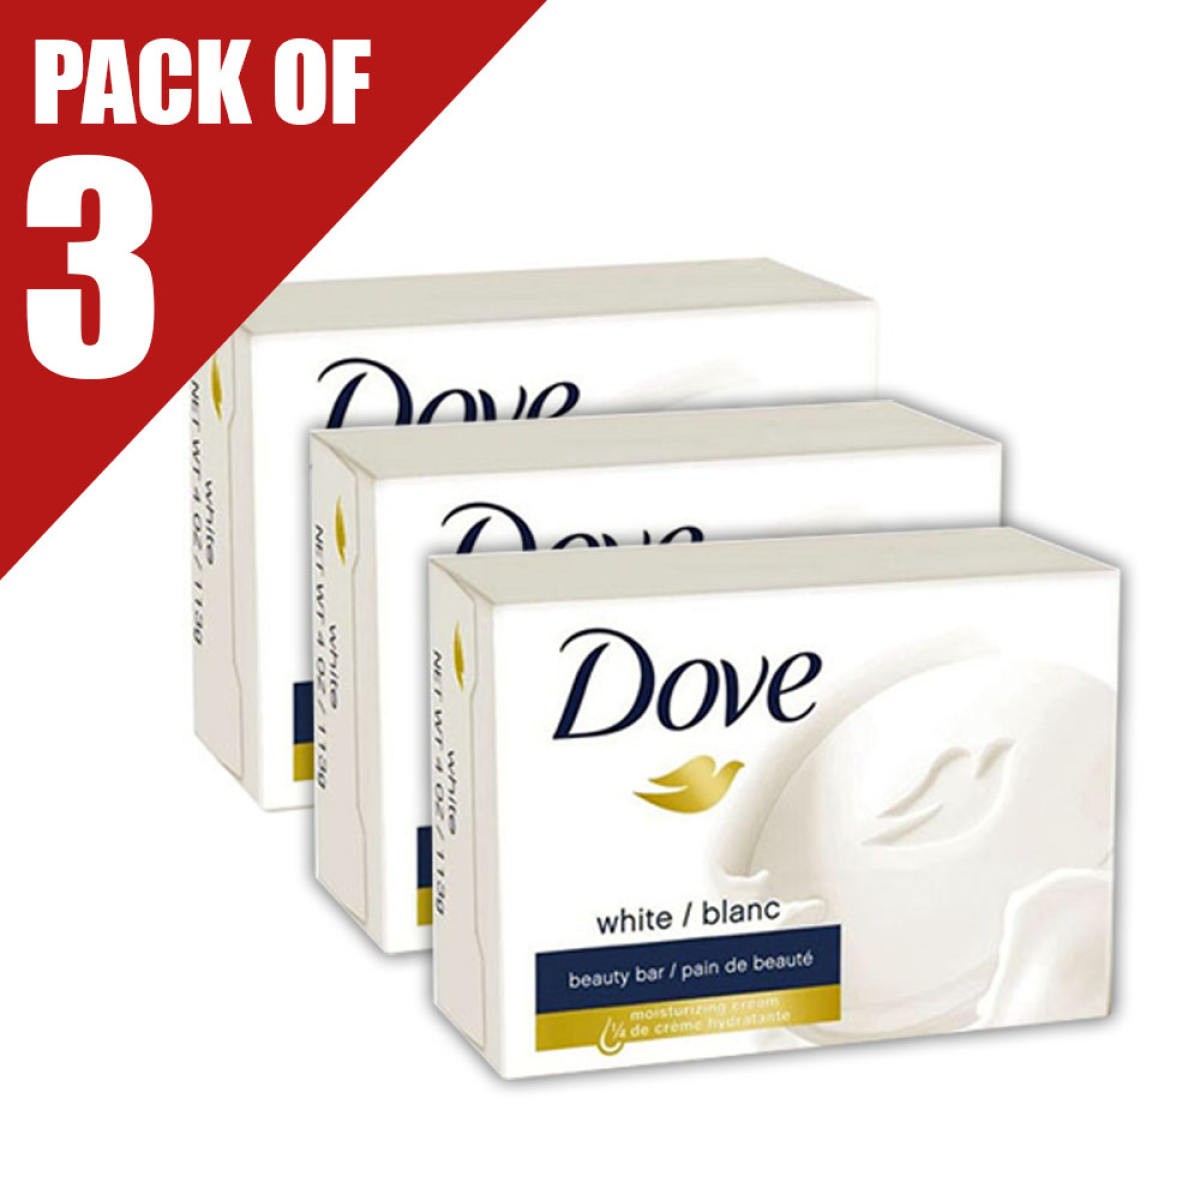 Dove White/Blanc Soap Pack of 3